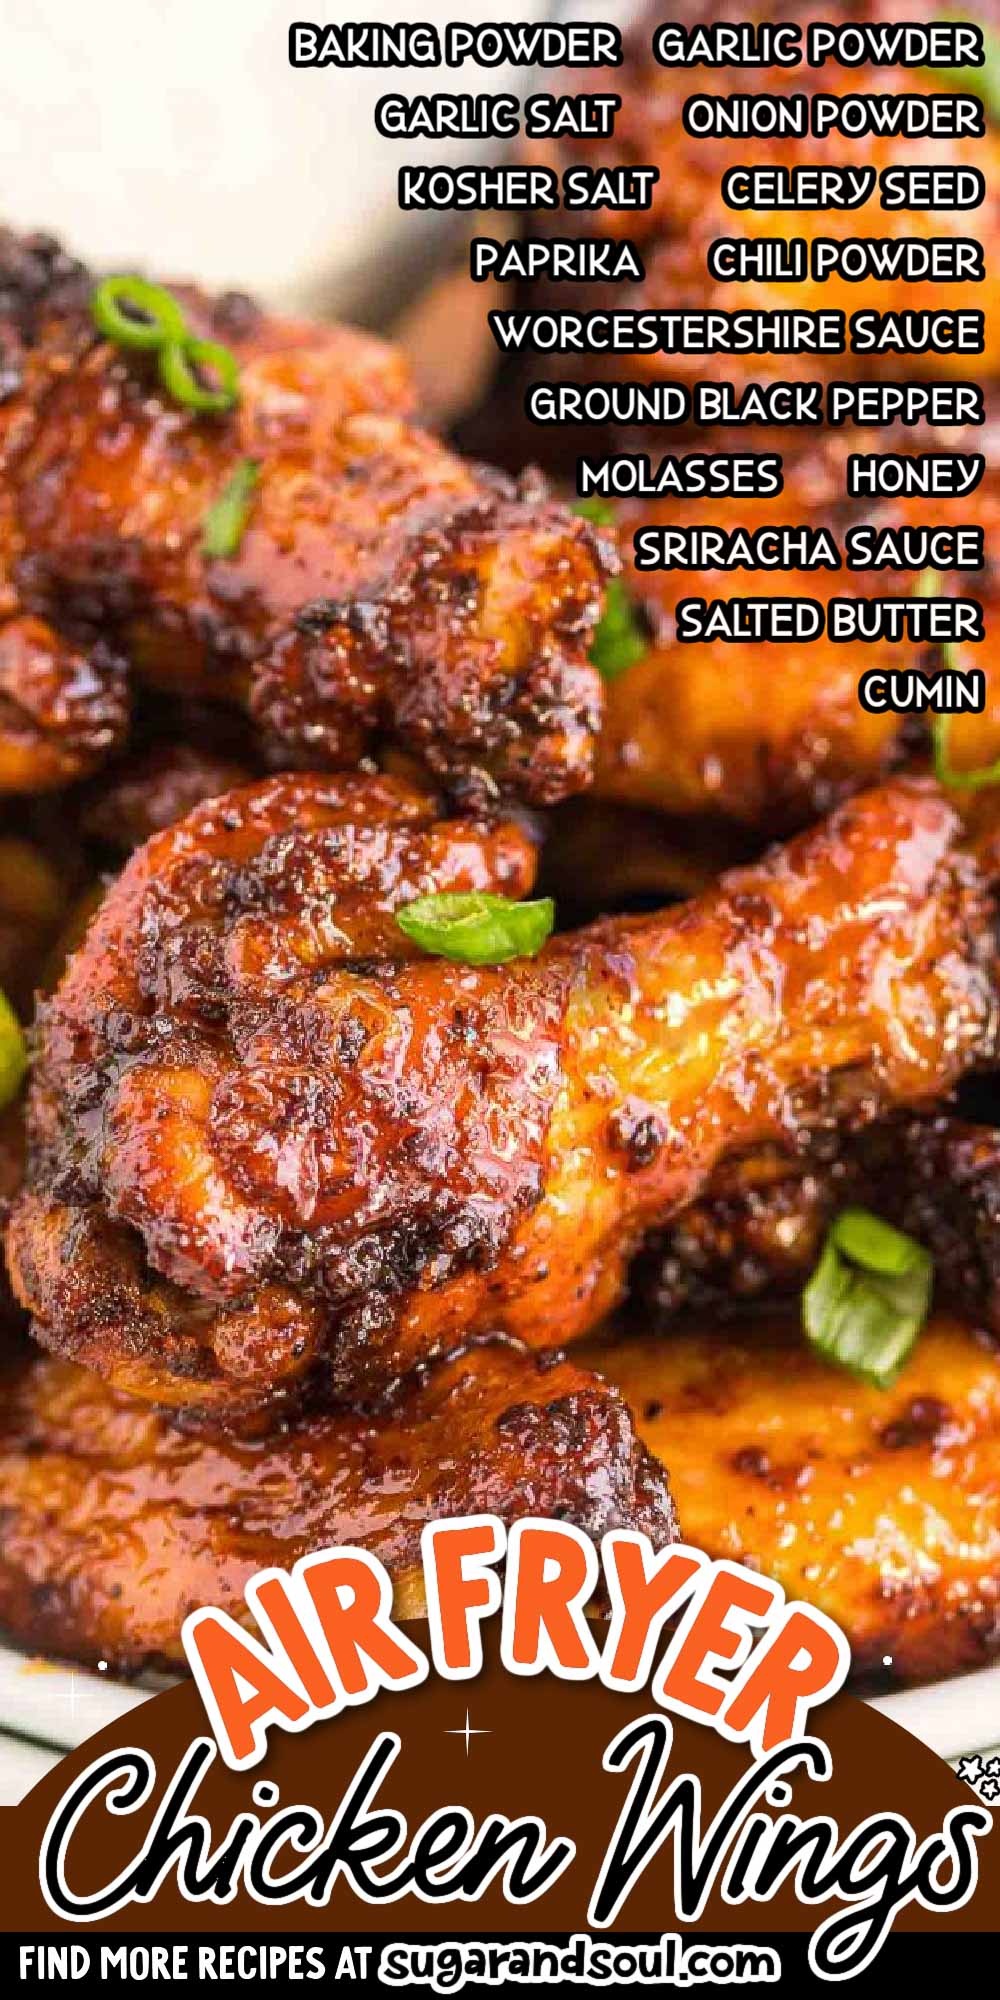 Want perfectly crispy Chicken Wings with your air fryer? You've got to make this recipe! These lip-smacking honey sriracha chicken wings and drumettes are so full of flavor you will go back for more! Made with honey, molasses, Sriracha sauce, and a killer rub!   via @sugarandsoulco